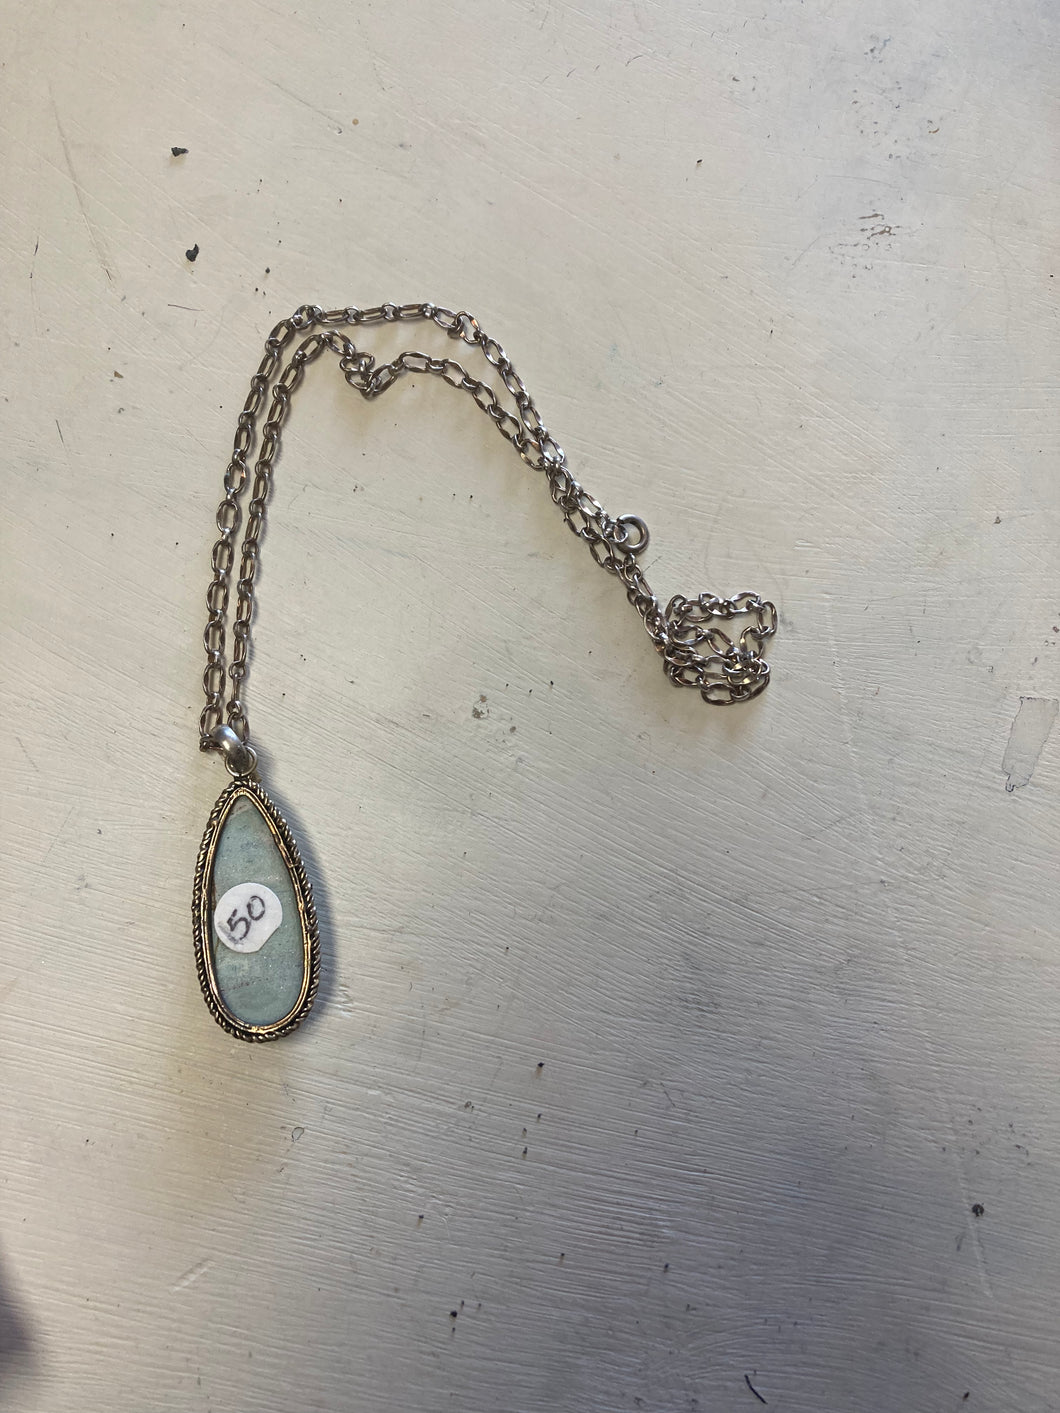 Bronze necklace with blue stone pendant